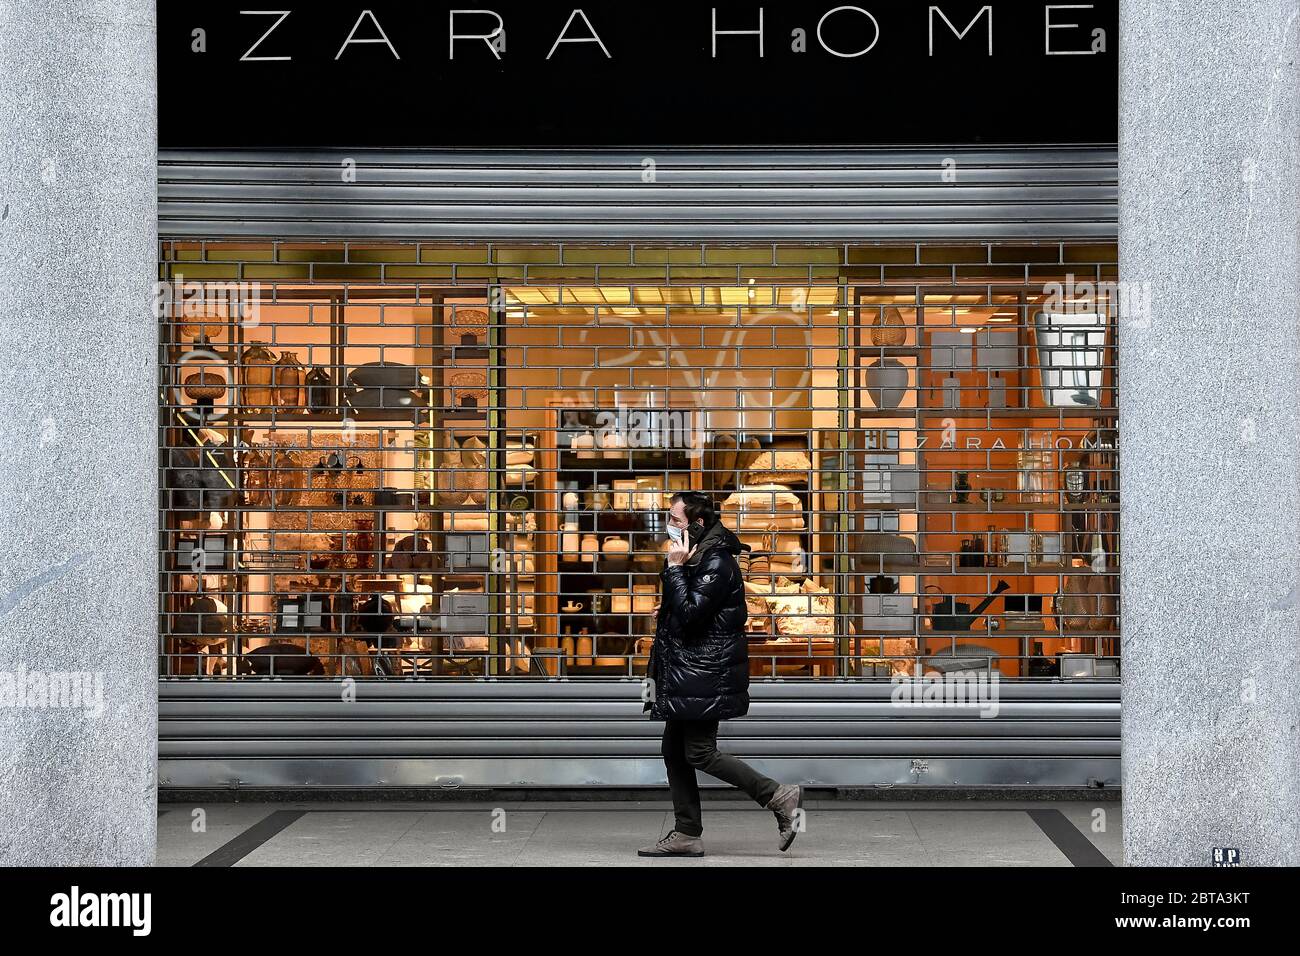 Zara Home Shop High Resolution Stock Photography and Images - Alamy